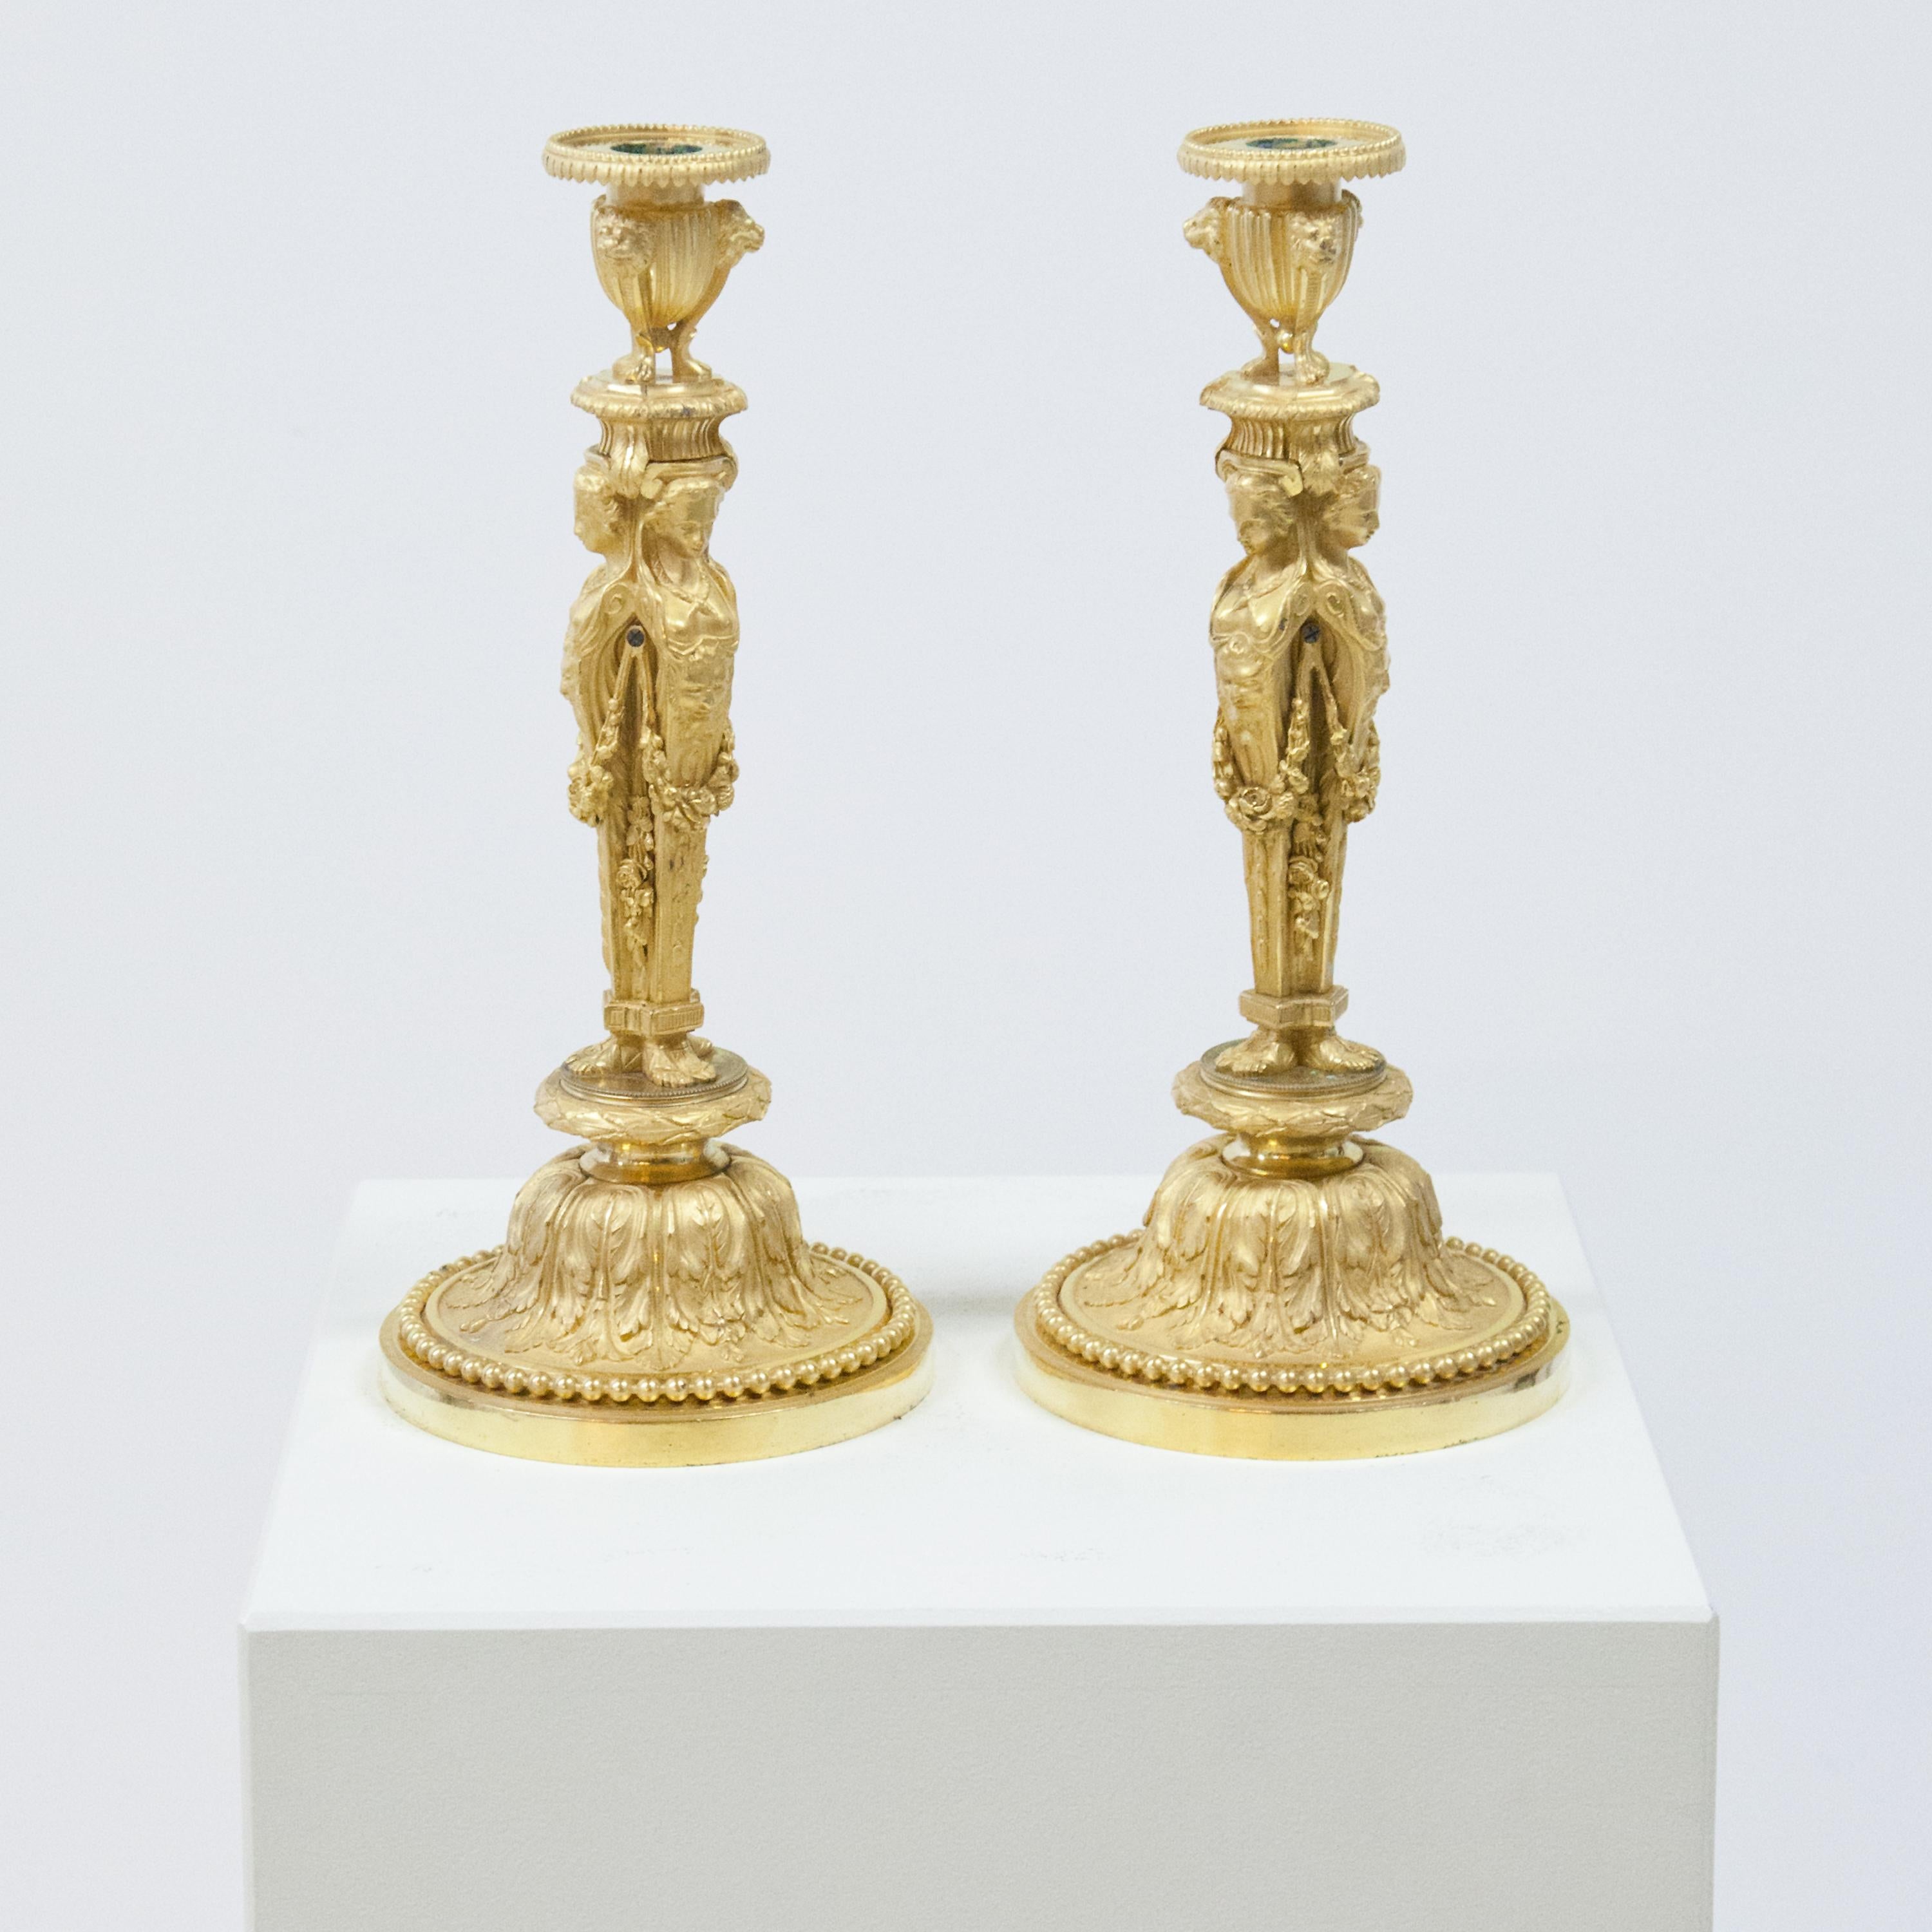 Empire candelabras with four female herms after a model by Jean-Démosthène Dugourc in the so-called grotesque style. Fire-gilded bronze.
     